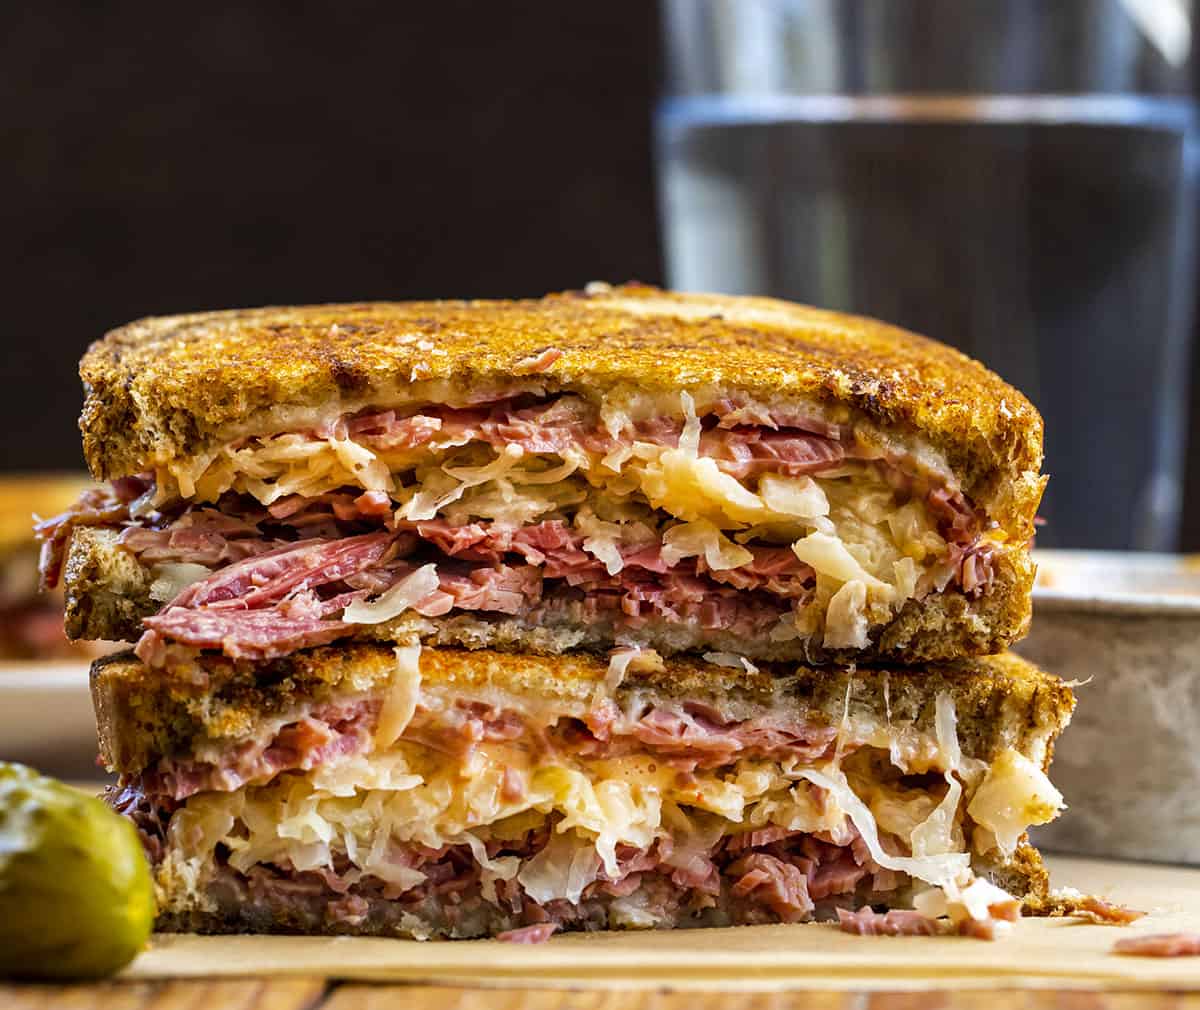 Reuben Sandwich Cut in Half and Stacked Showing Inside